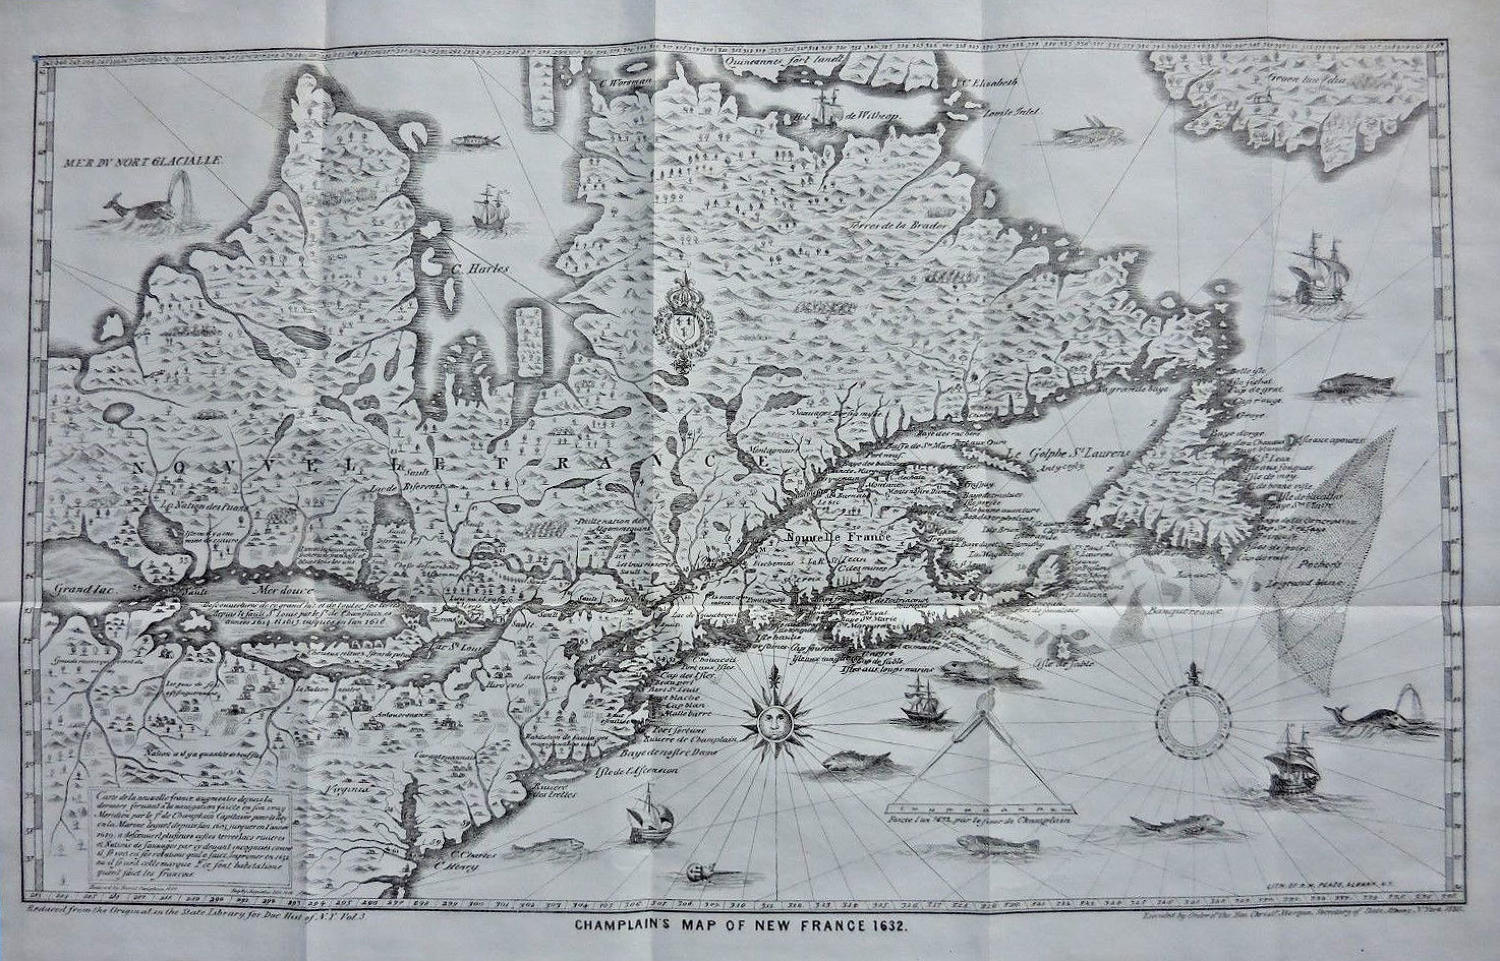 Champlain's Map of New France